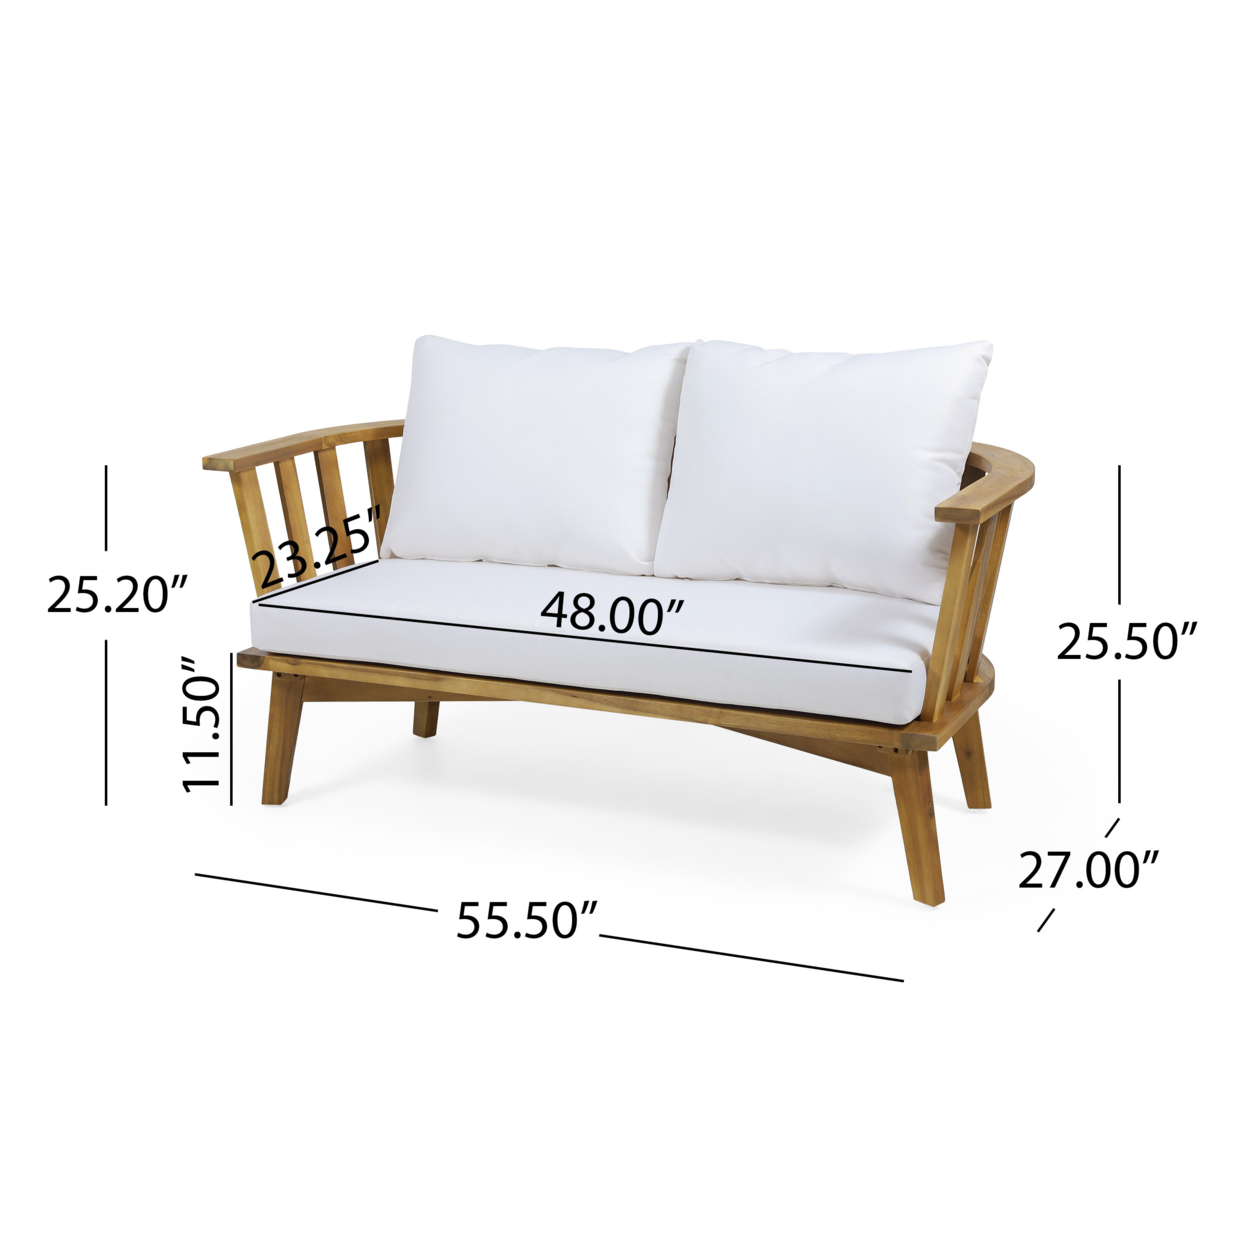 Laiah Outdoor Wooden Loveseat And Coffee Table Set